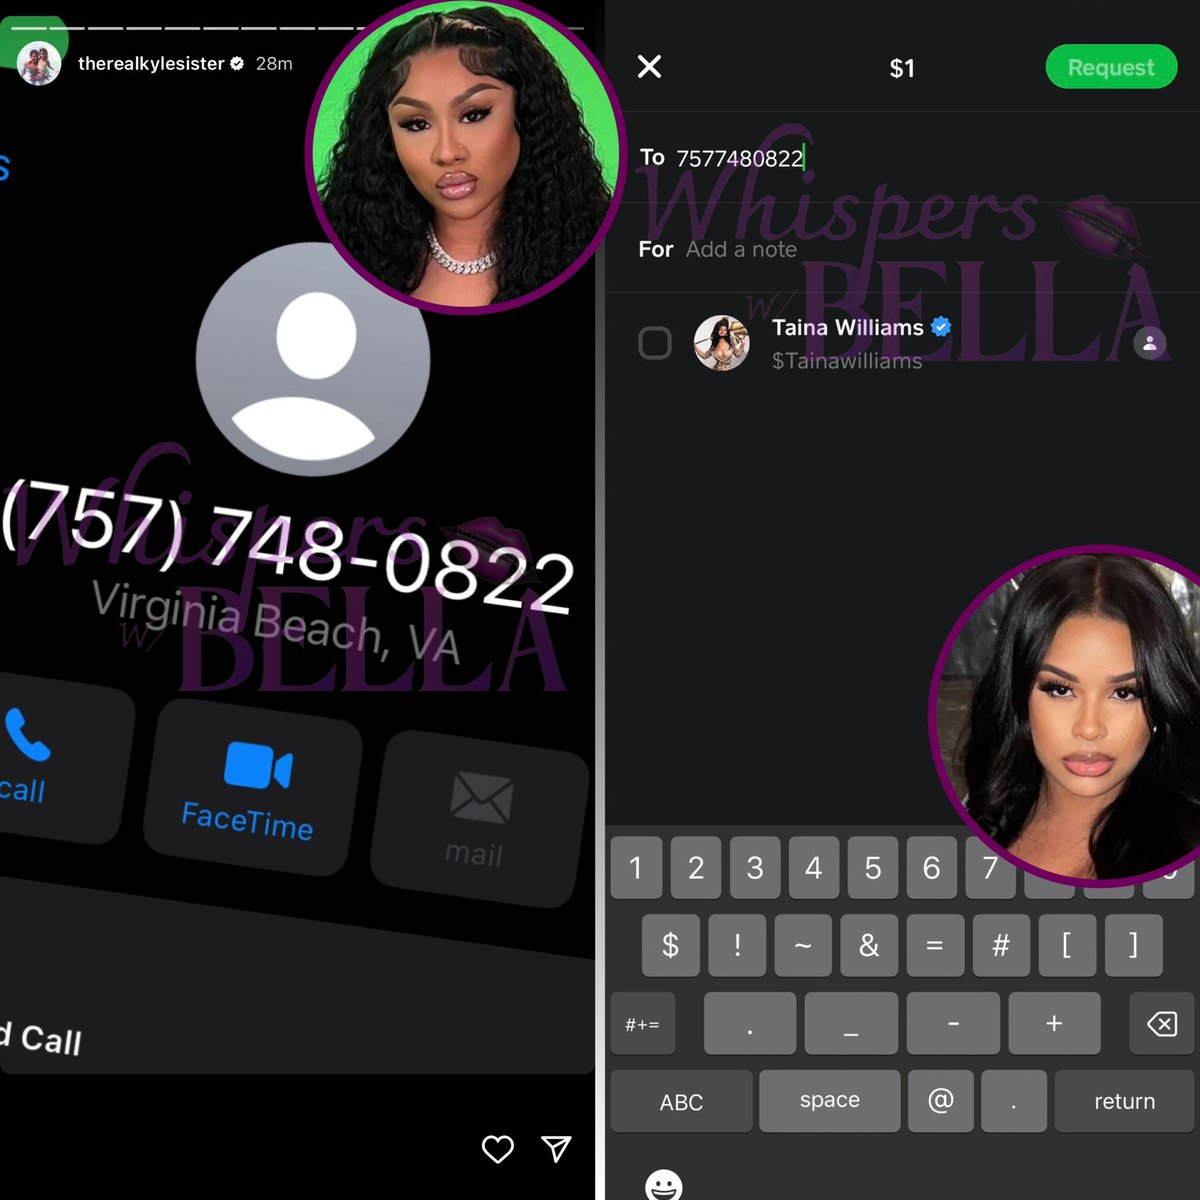 Ari posted and deleted a number that was discovered to be connected to Taina Williams’ Cash App 👀